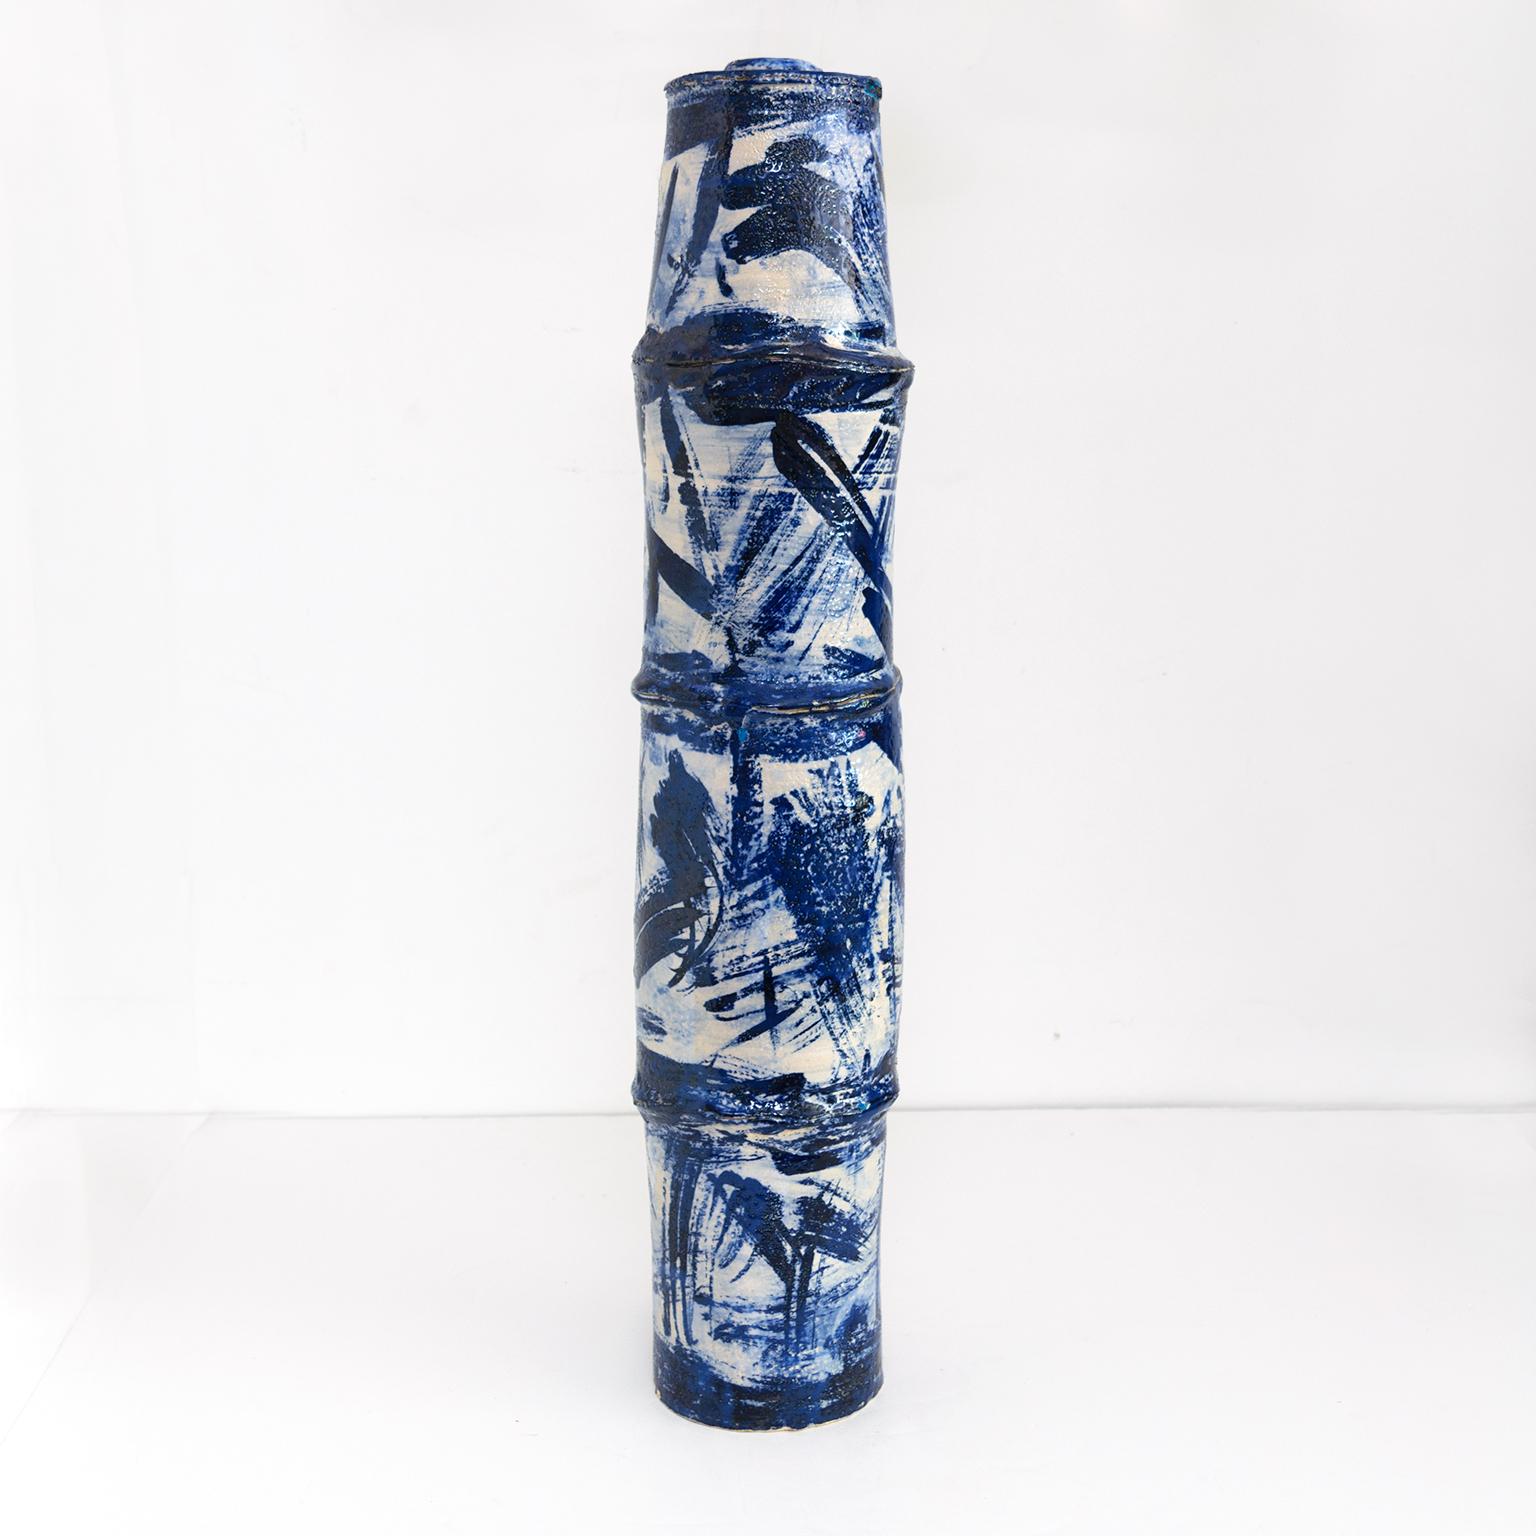 A tall contemporarty Scandinavian Modern unique studio vase by artist Eli Keller. Made of stoneware, partly white / blue glazed, in the form of a stem of bamboo. The artist has taken inspiration from a journey in 2018 to Jingdezhen,